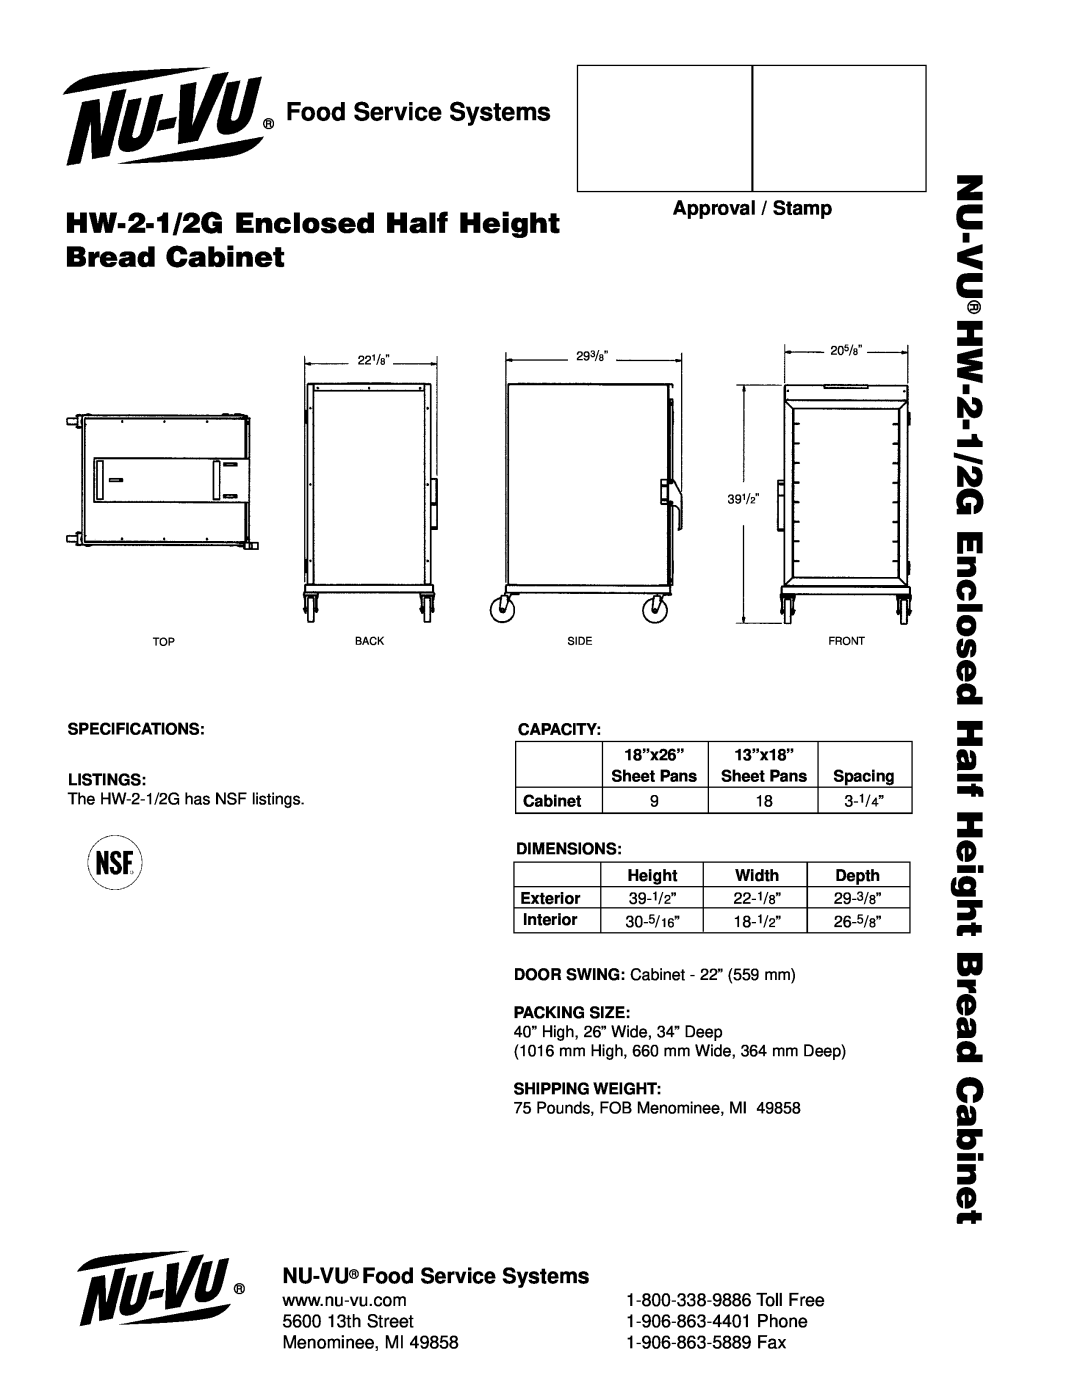 Middleby Cooking Systems Group manual HW-2-1/2GEnclosed Half Height Bread Cabinet, Nu-Vu, Food Service Systems, Phone 